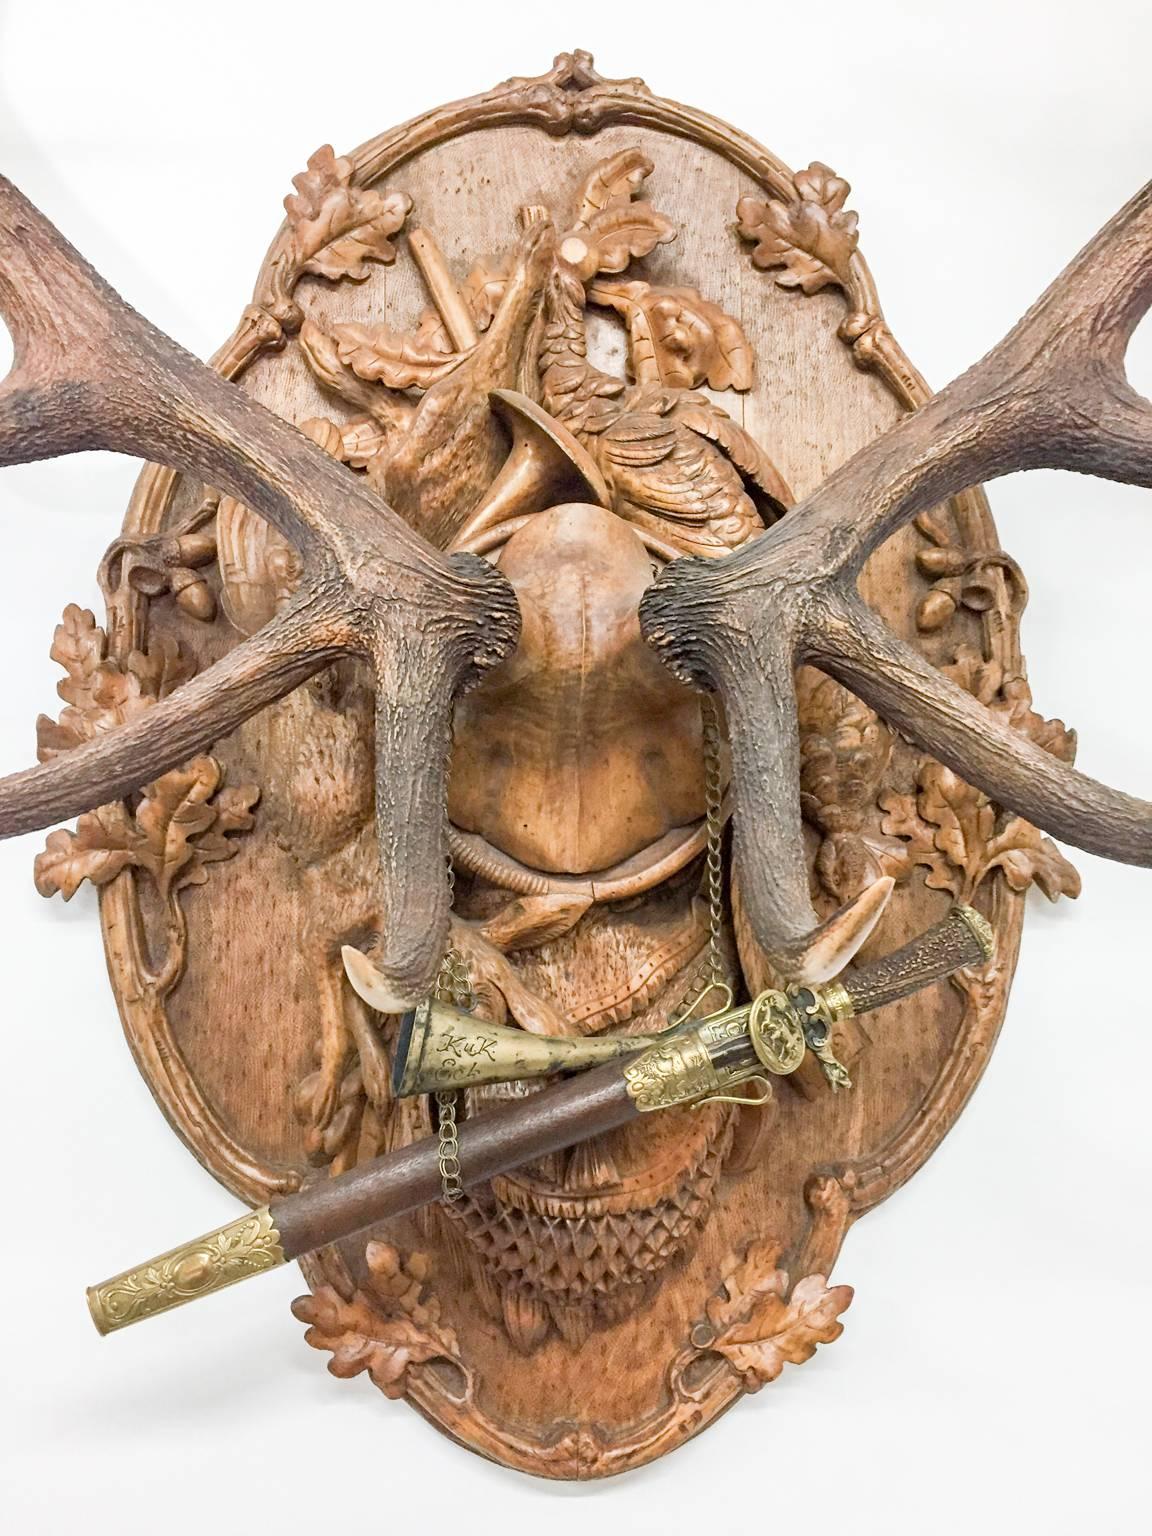 This is an extraordinary 19th century Austrian Red Stag trophy of Emperor Franz Josef which includes the personal court and military swords of the Emperor as well as his hirschfänger (hunt sword), mounted together on an original, hand-carved plaque.